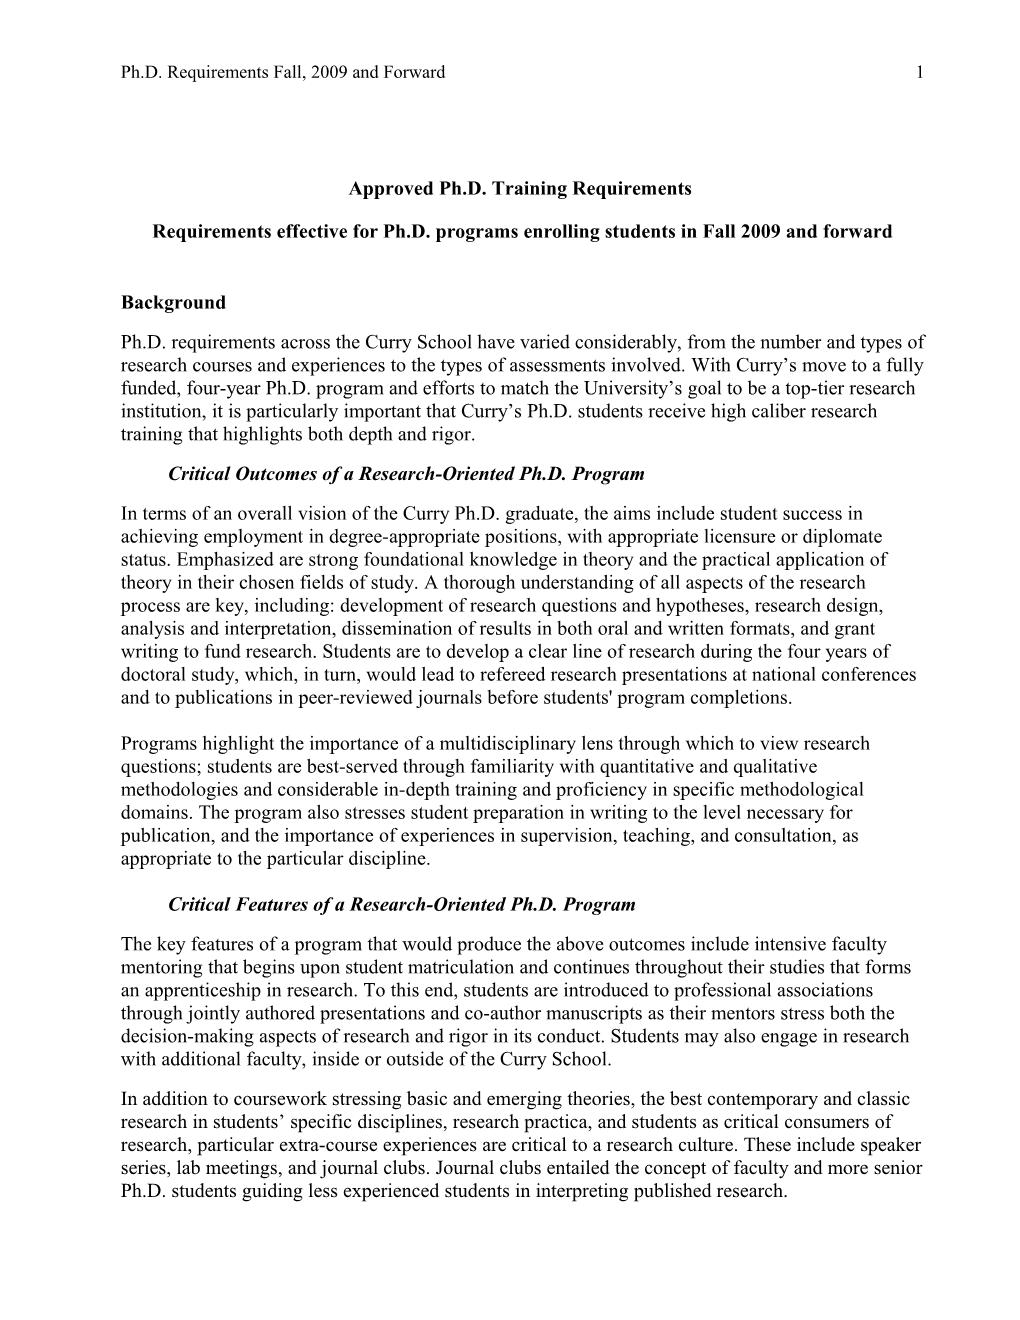 Faculty Council Recommendations for Ph.D. Training 1